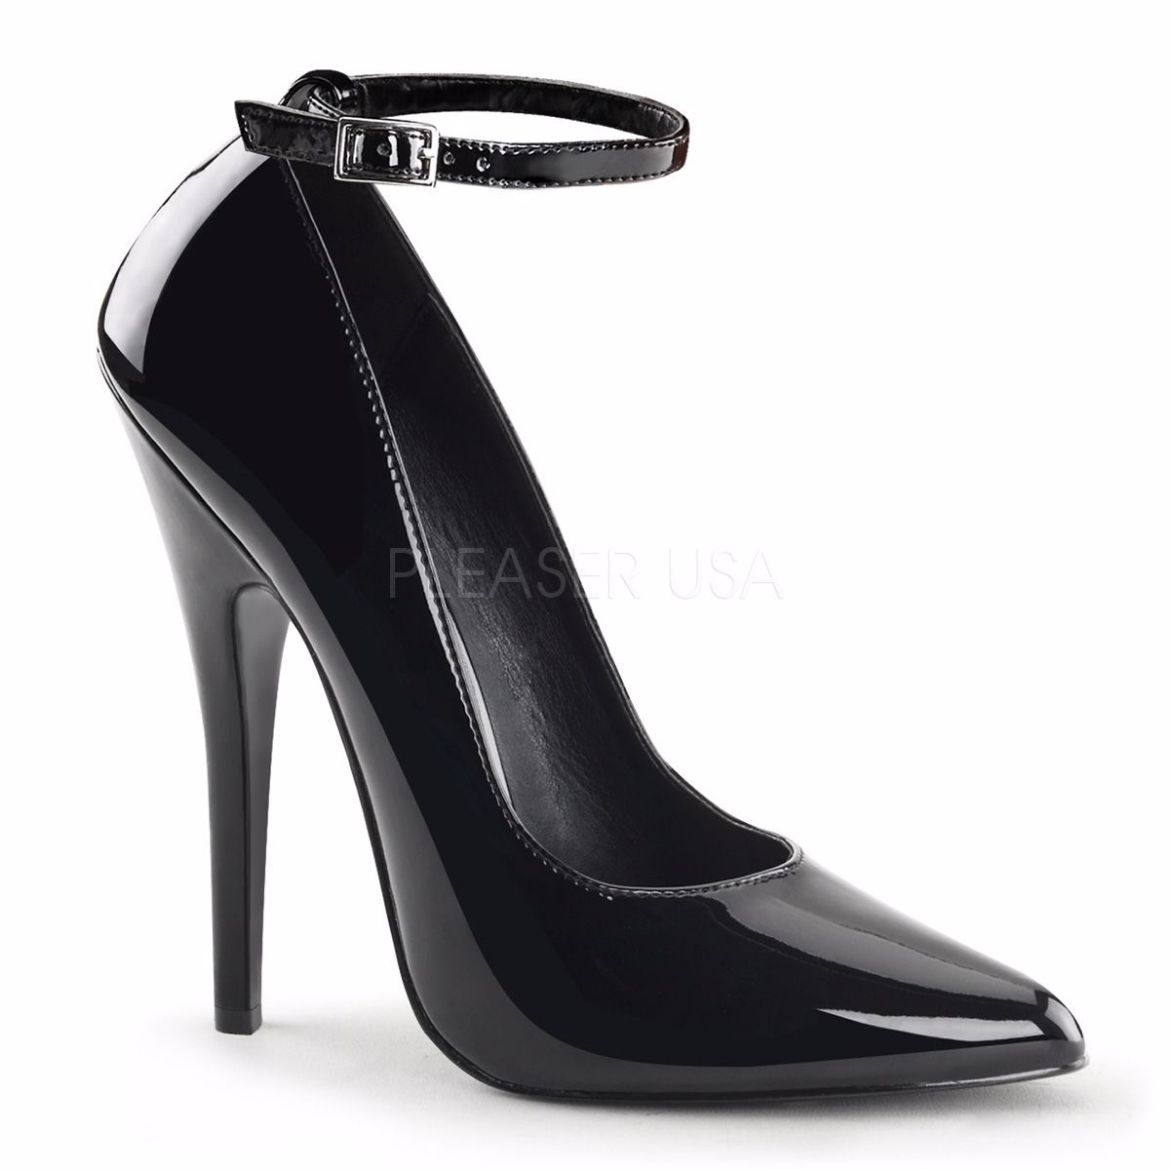 Product image of Devious Domina-431 Black Patent, 6 inch (15.2 cm) Heel Court Pump Shoes